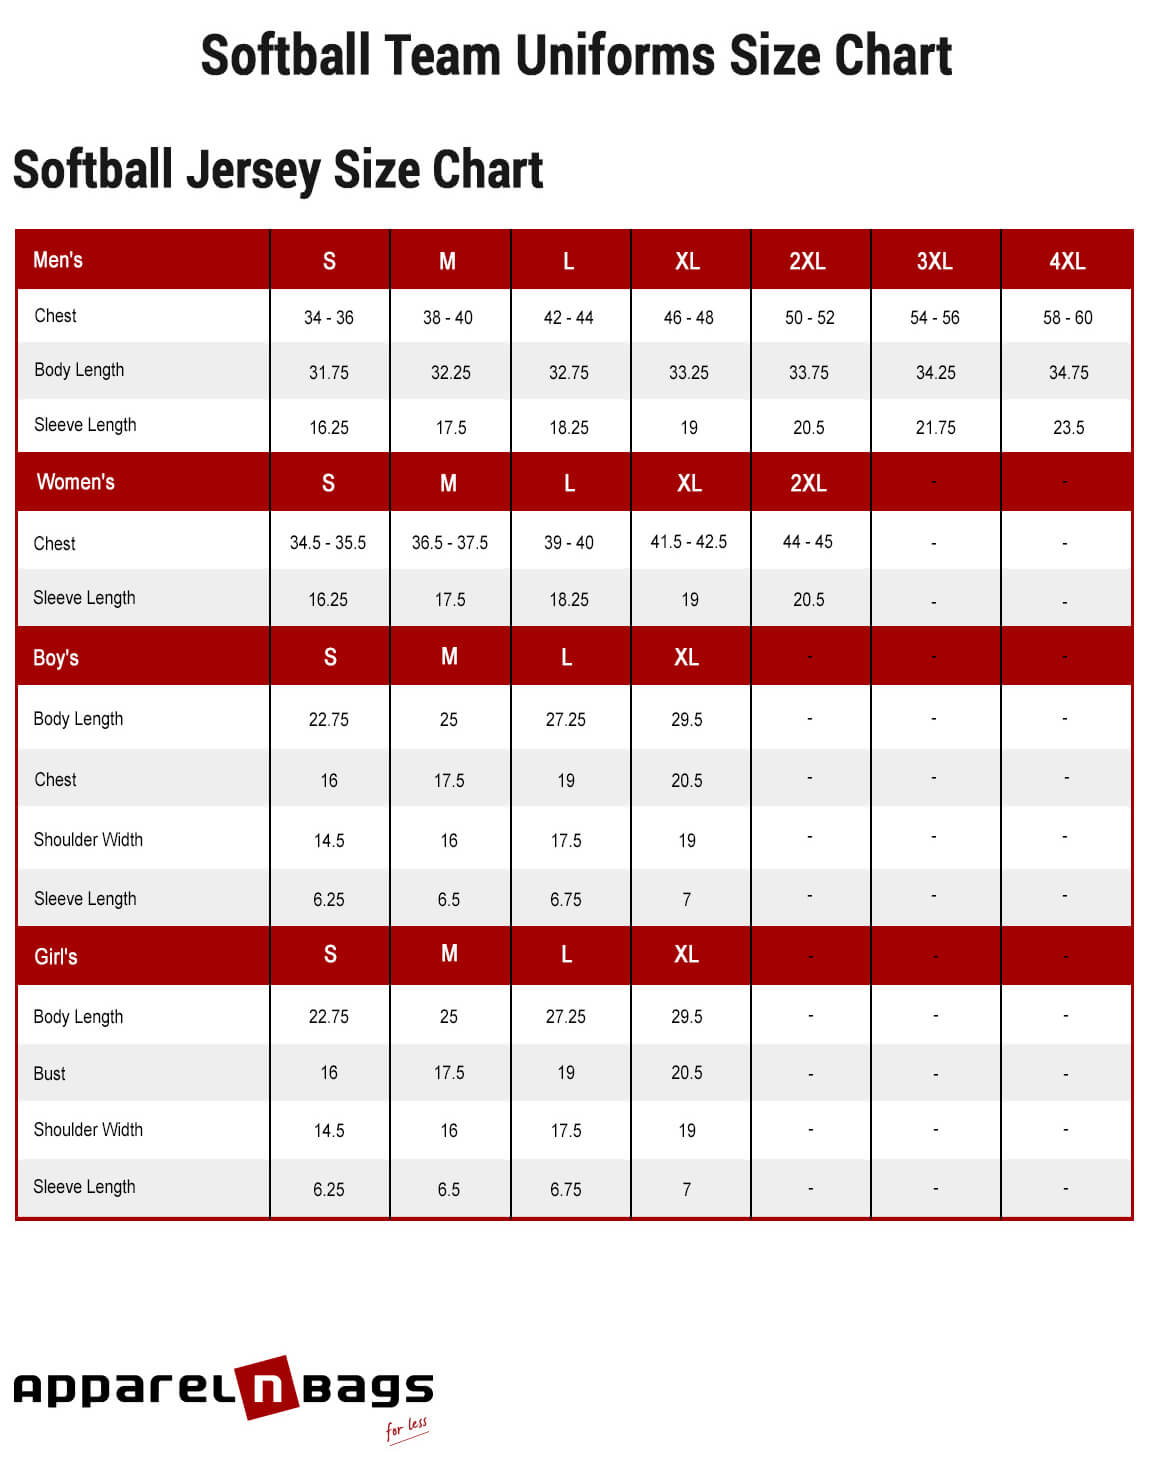 Accurate Softball Jerseys Size Chart and Measurements Guide